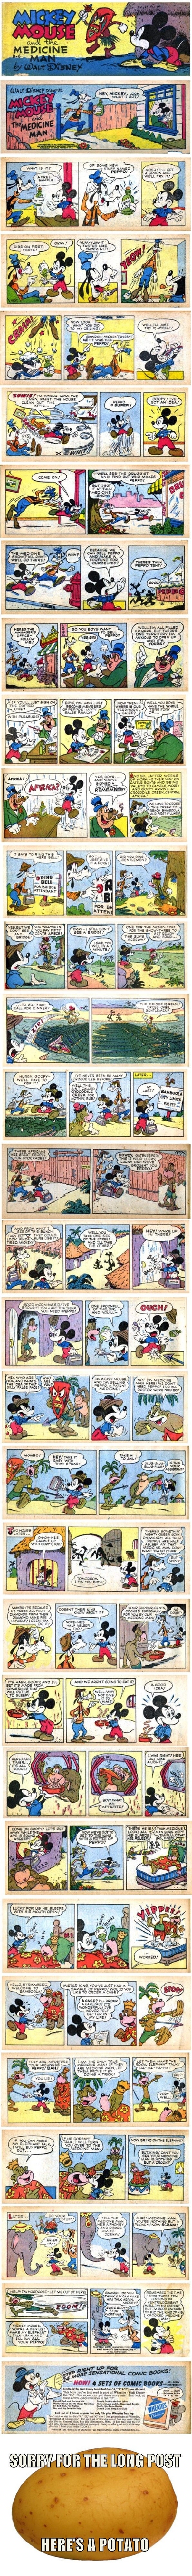 Mickey Mouse & Goofy dealing speed in Africa